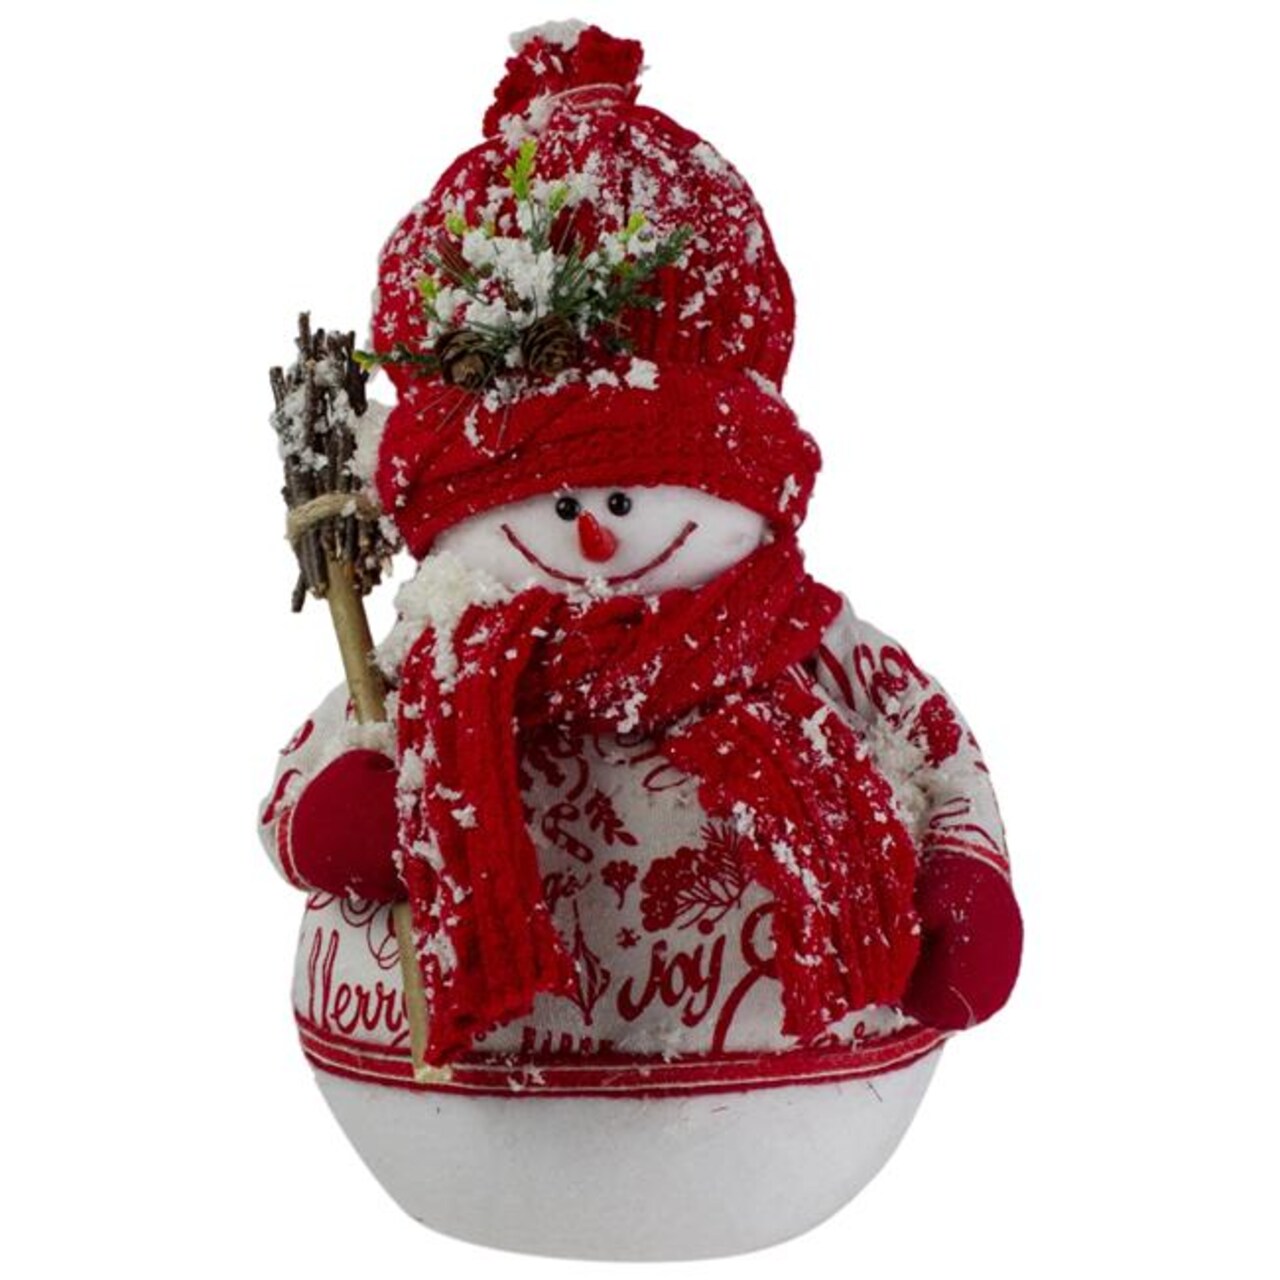 NorthLight 34314942 12.25 in. Standing Snowman Table Top Christmas Figure with Broom, Red &#x26; White